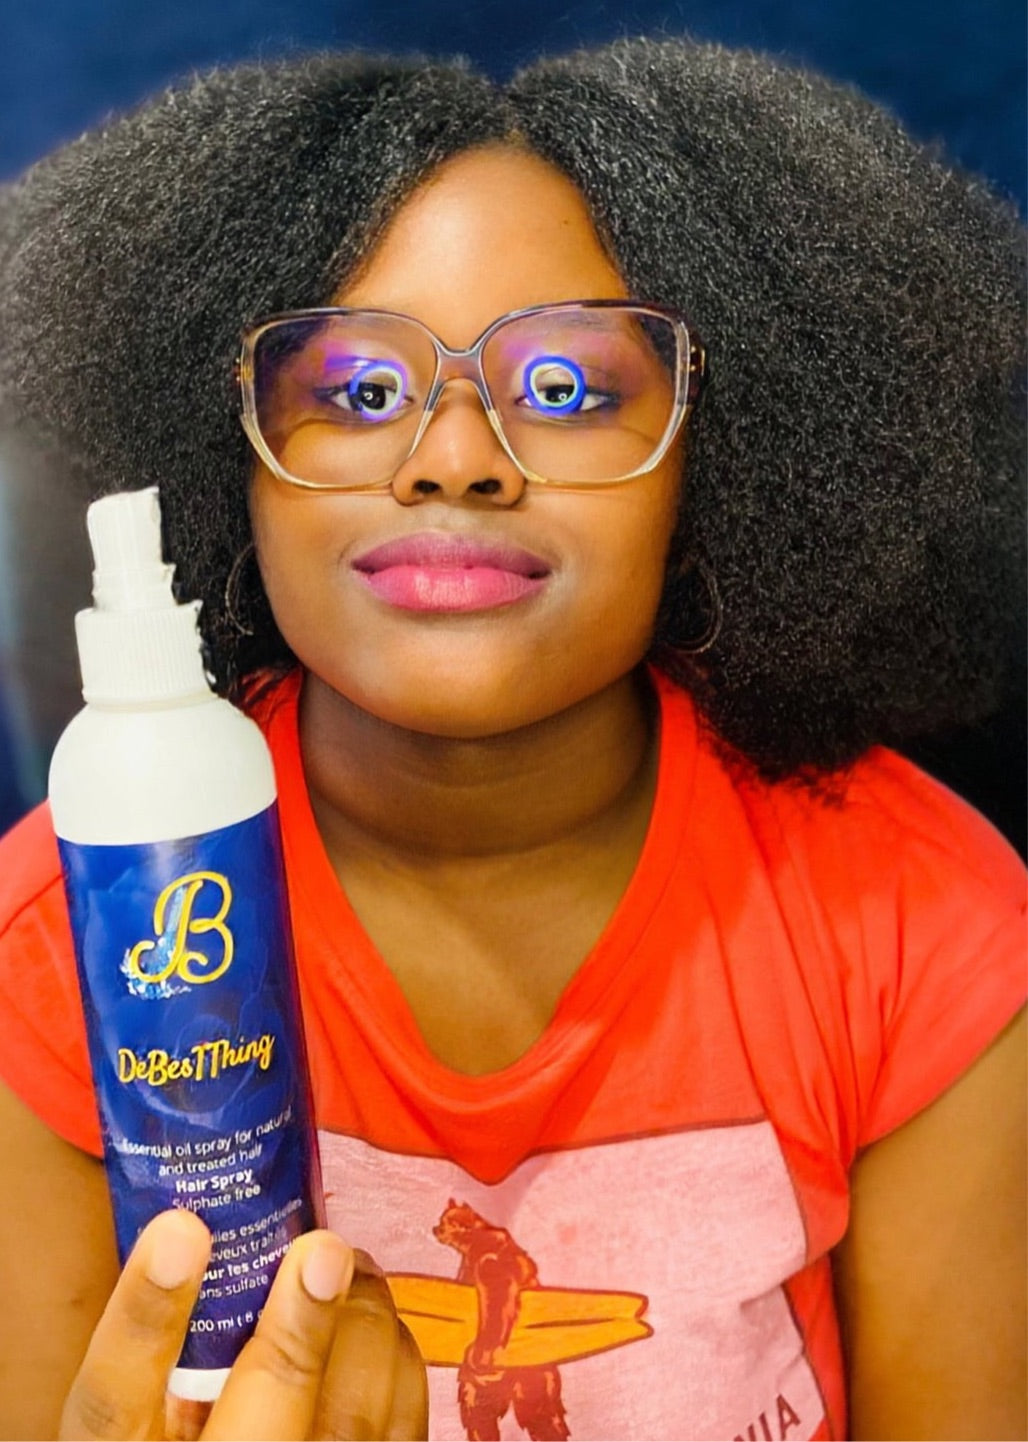 Rice Extract Protein and Sea Moss with Rosemary Oil 
(Hairspray)